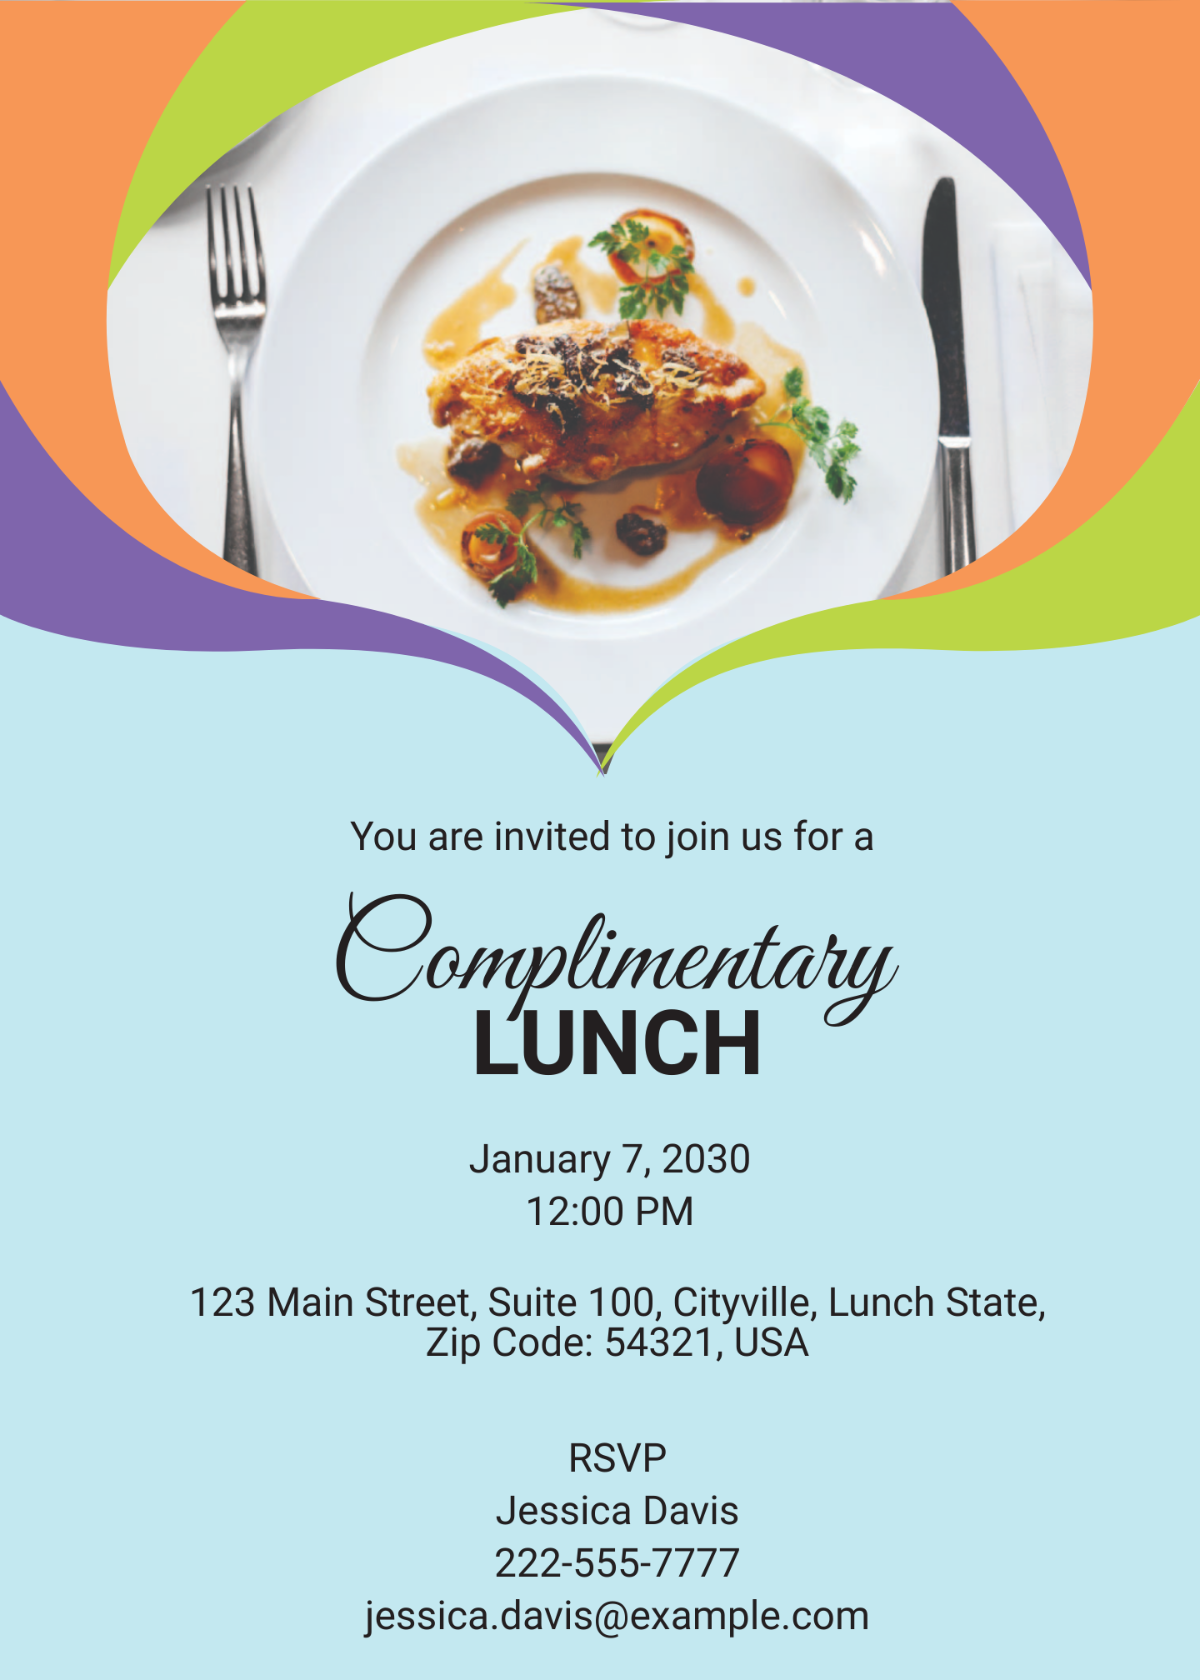 Complimentary Lunch Invitation